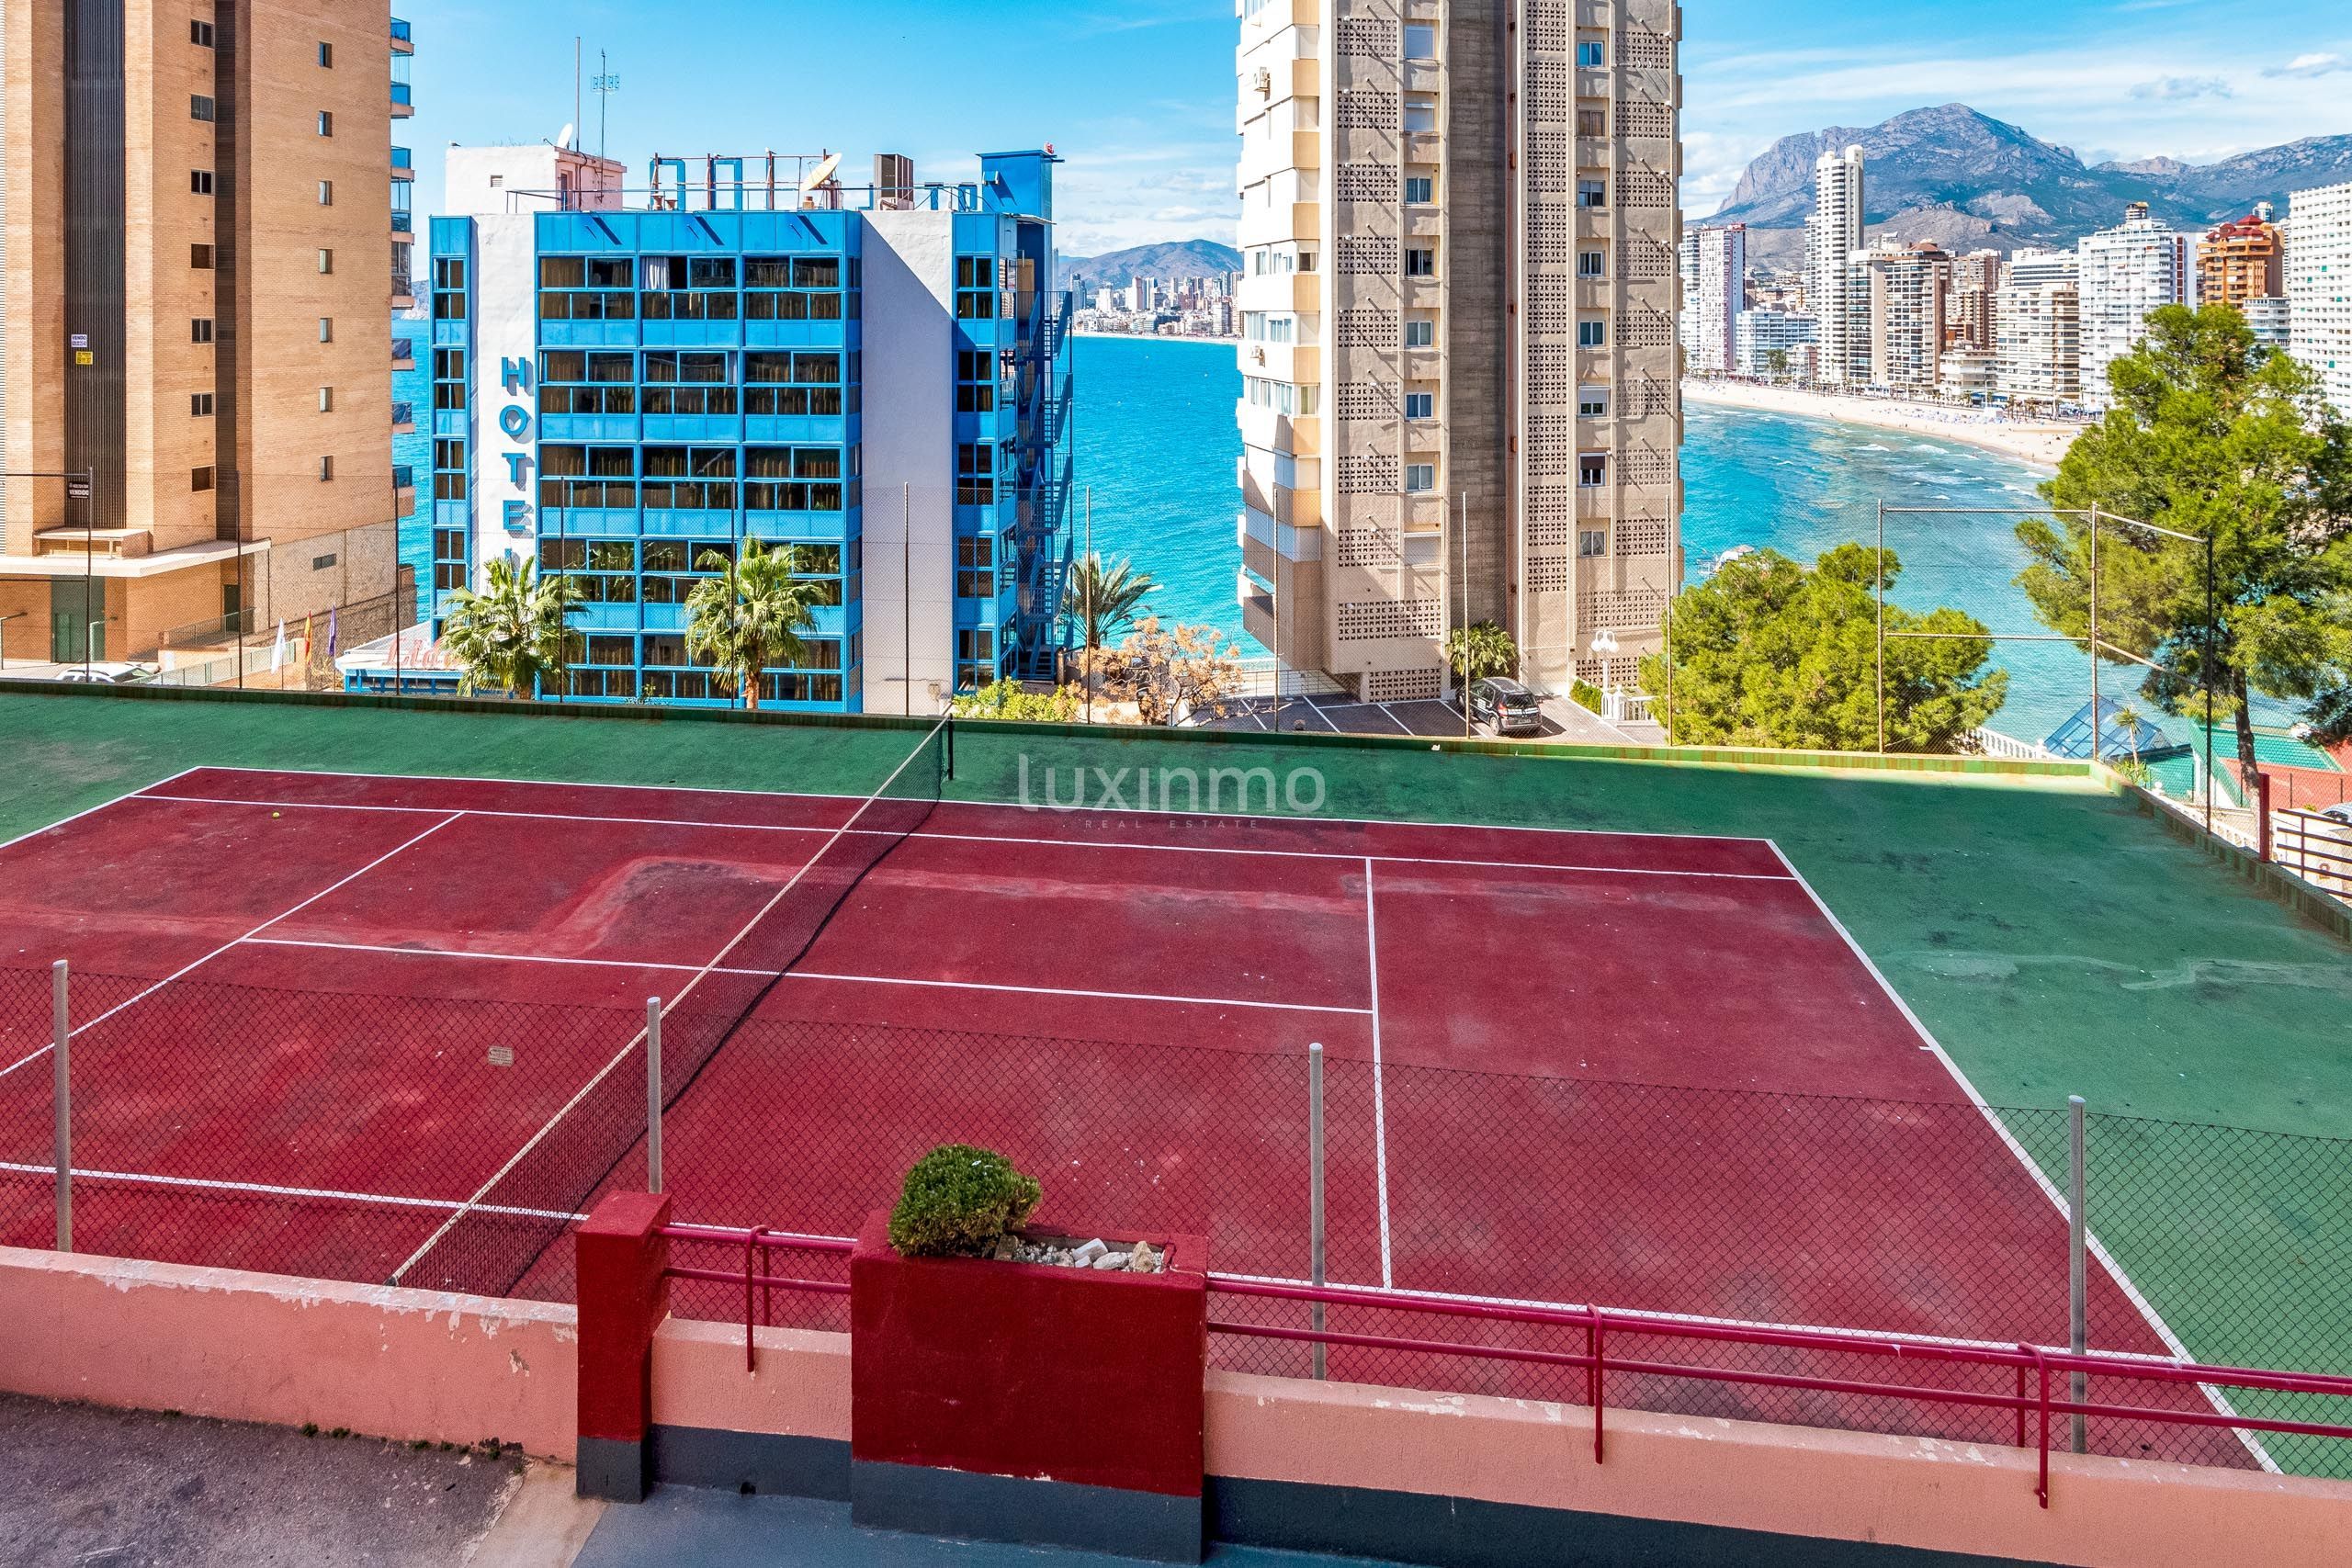 Apartment for sale in Benidorm 19